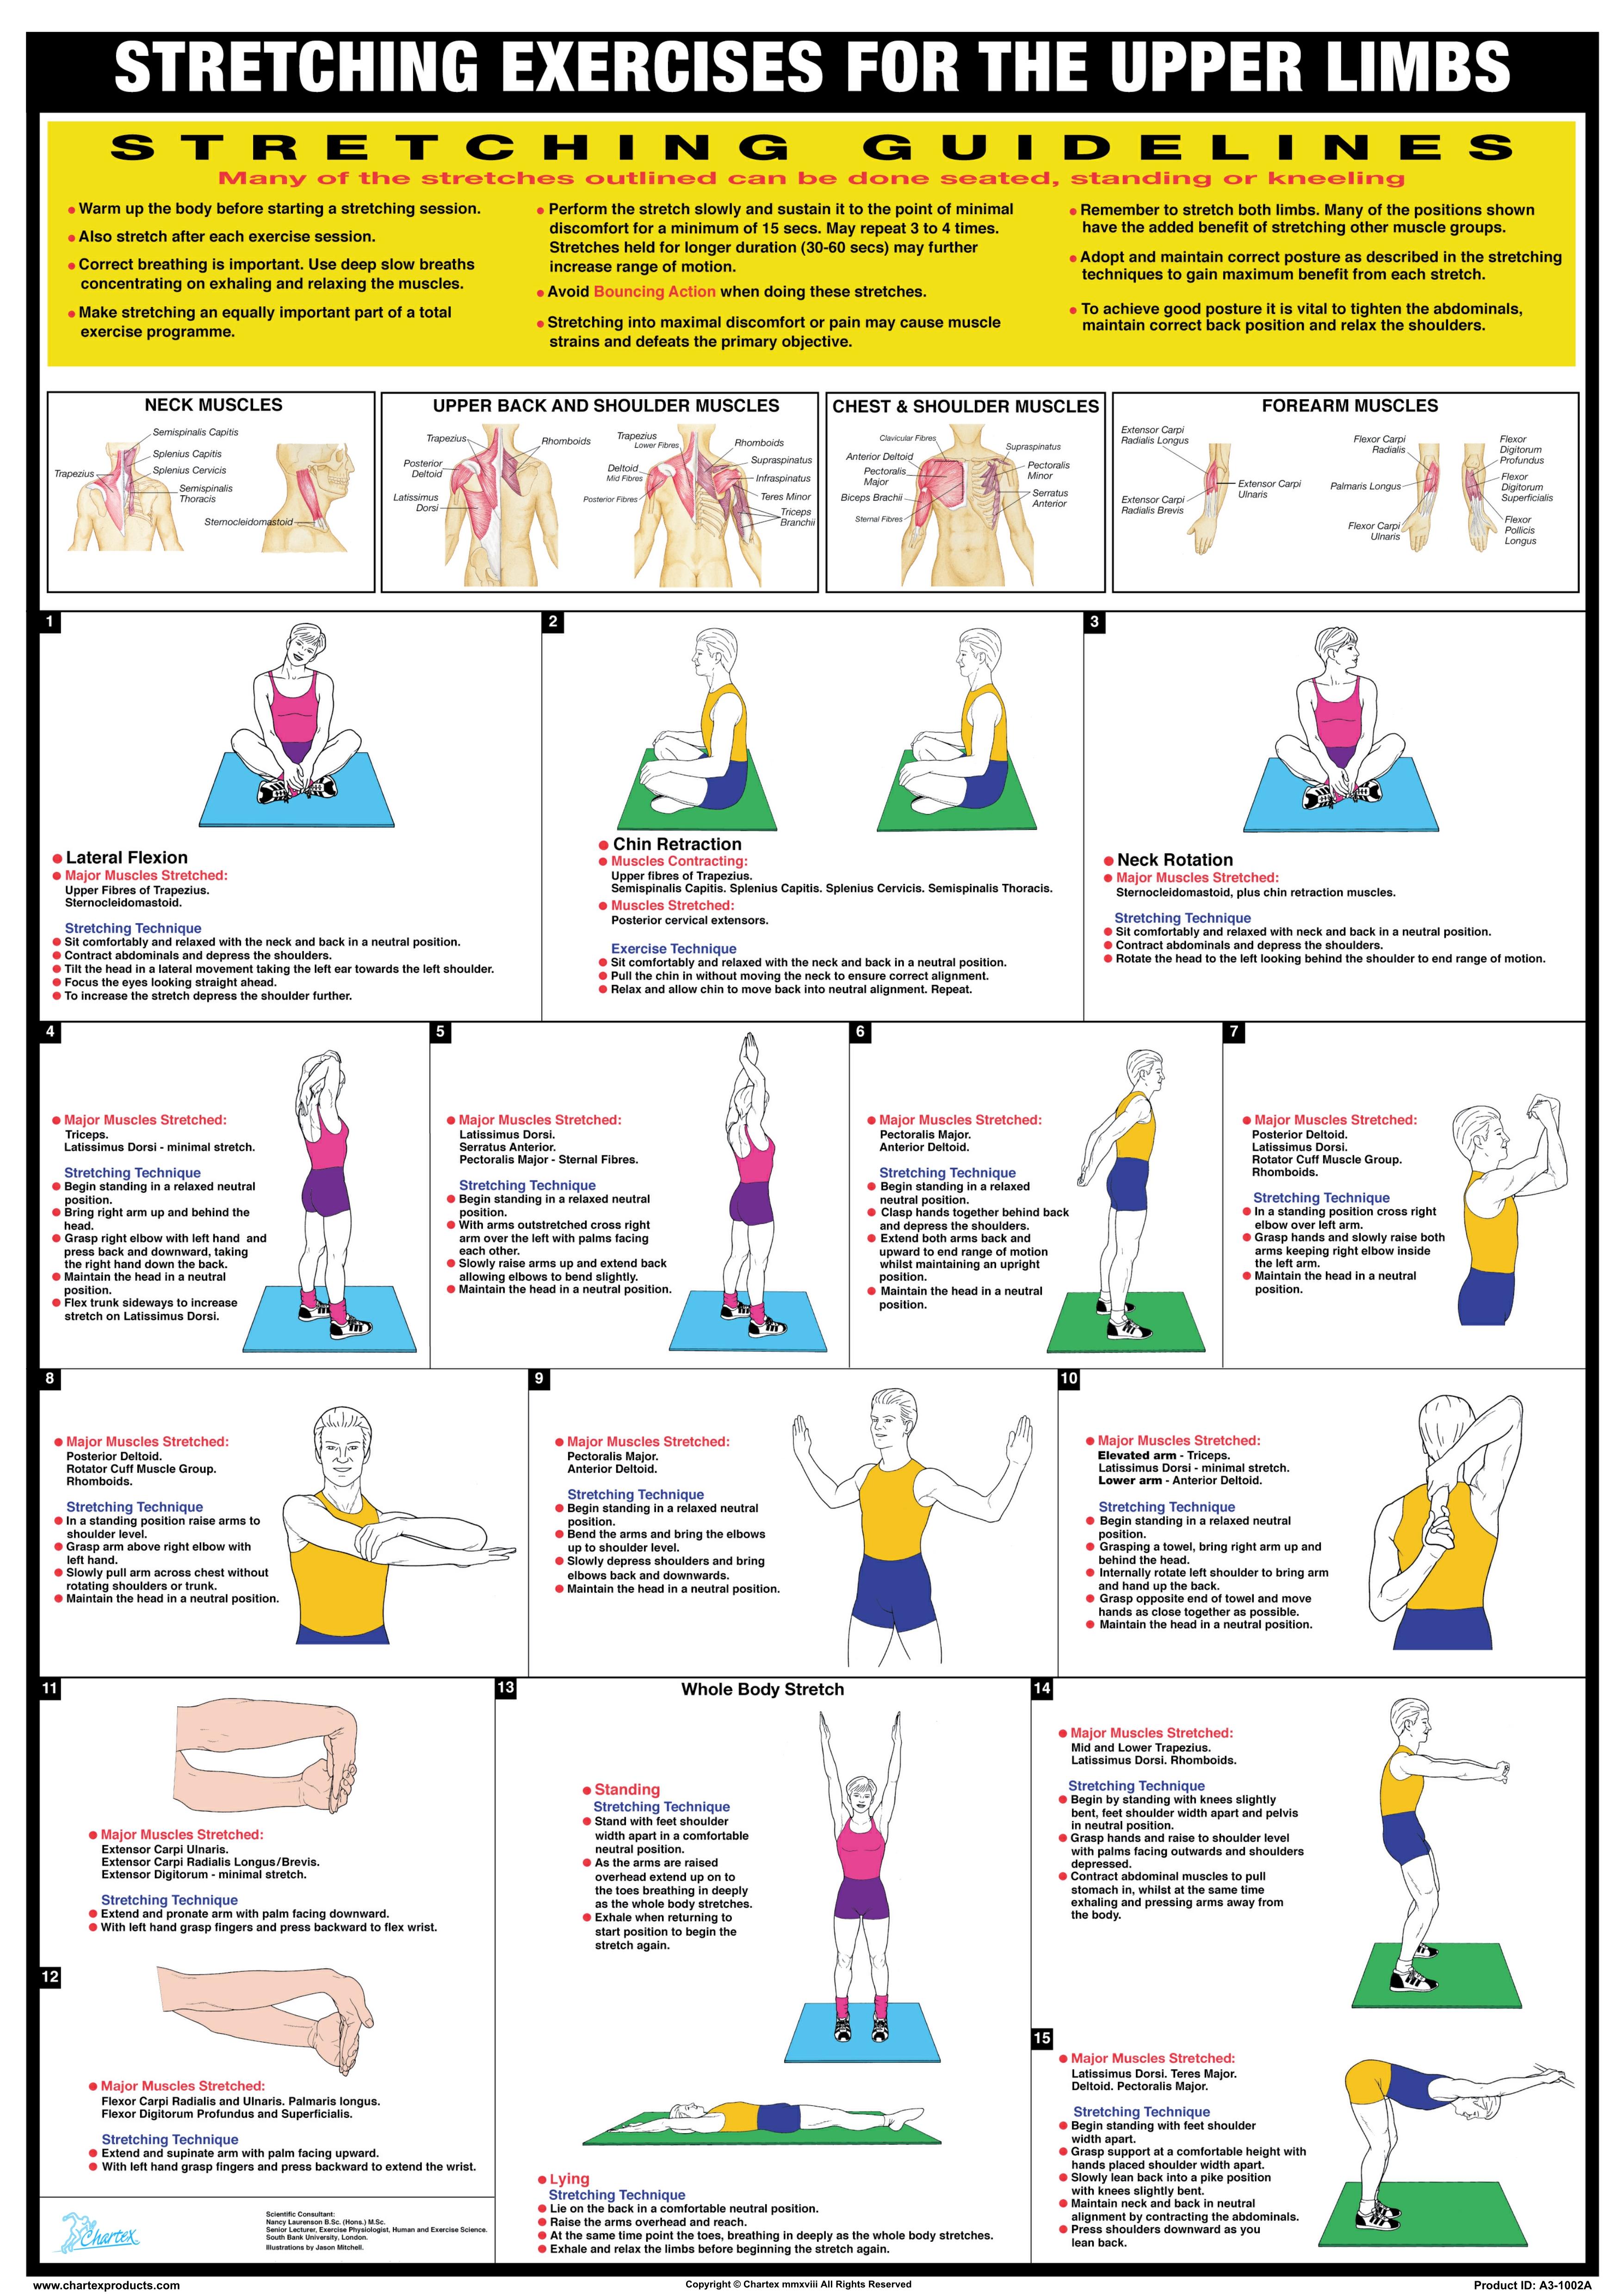 Stretching Exercise Chart - Upper Limbs